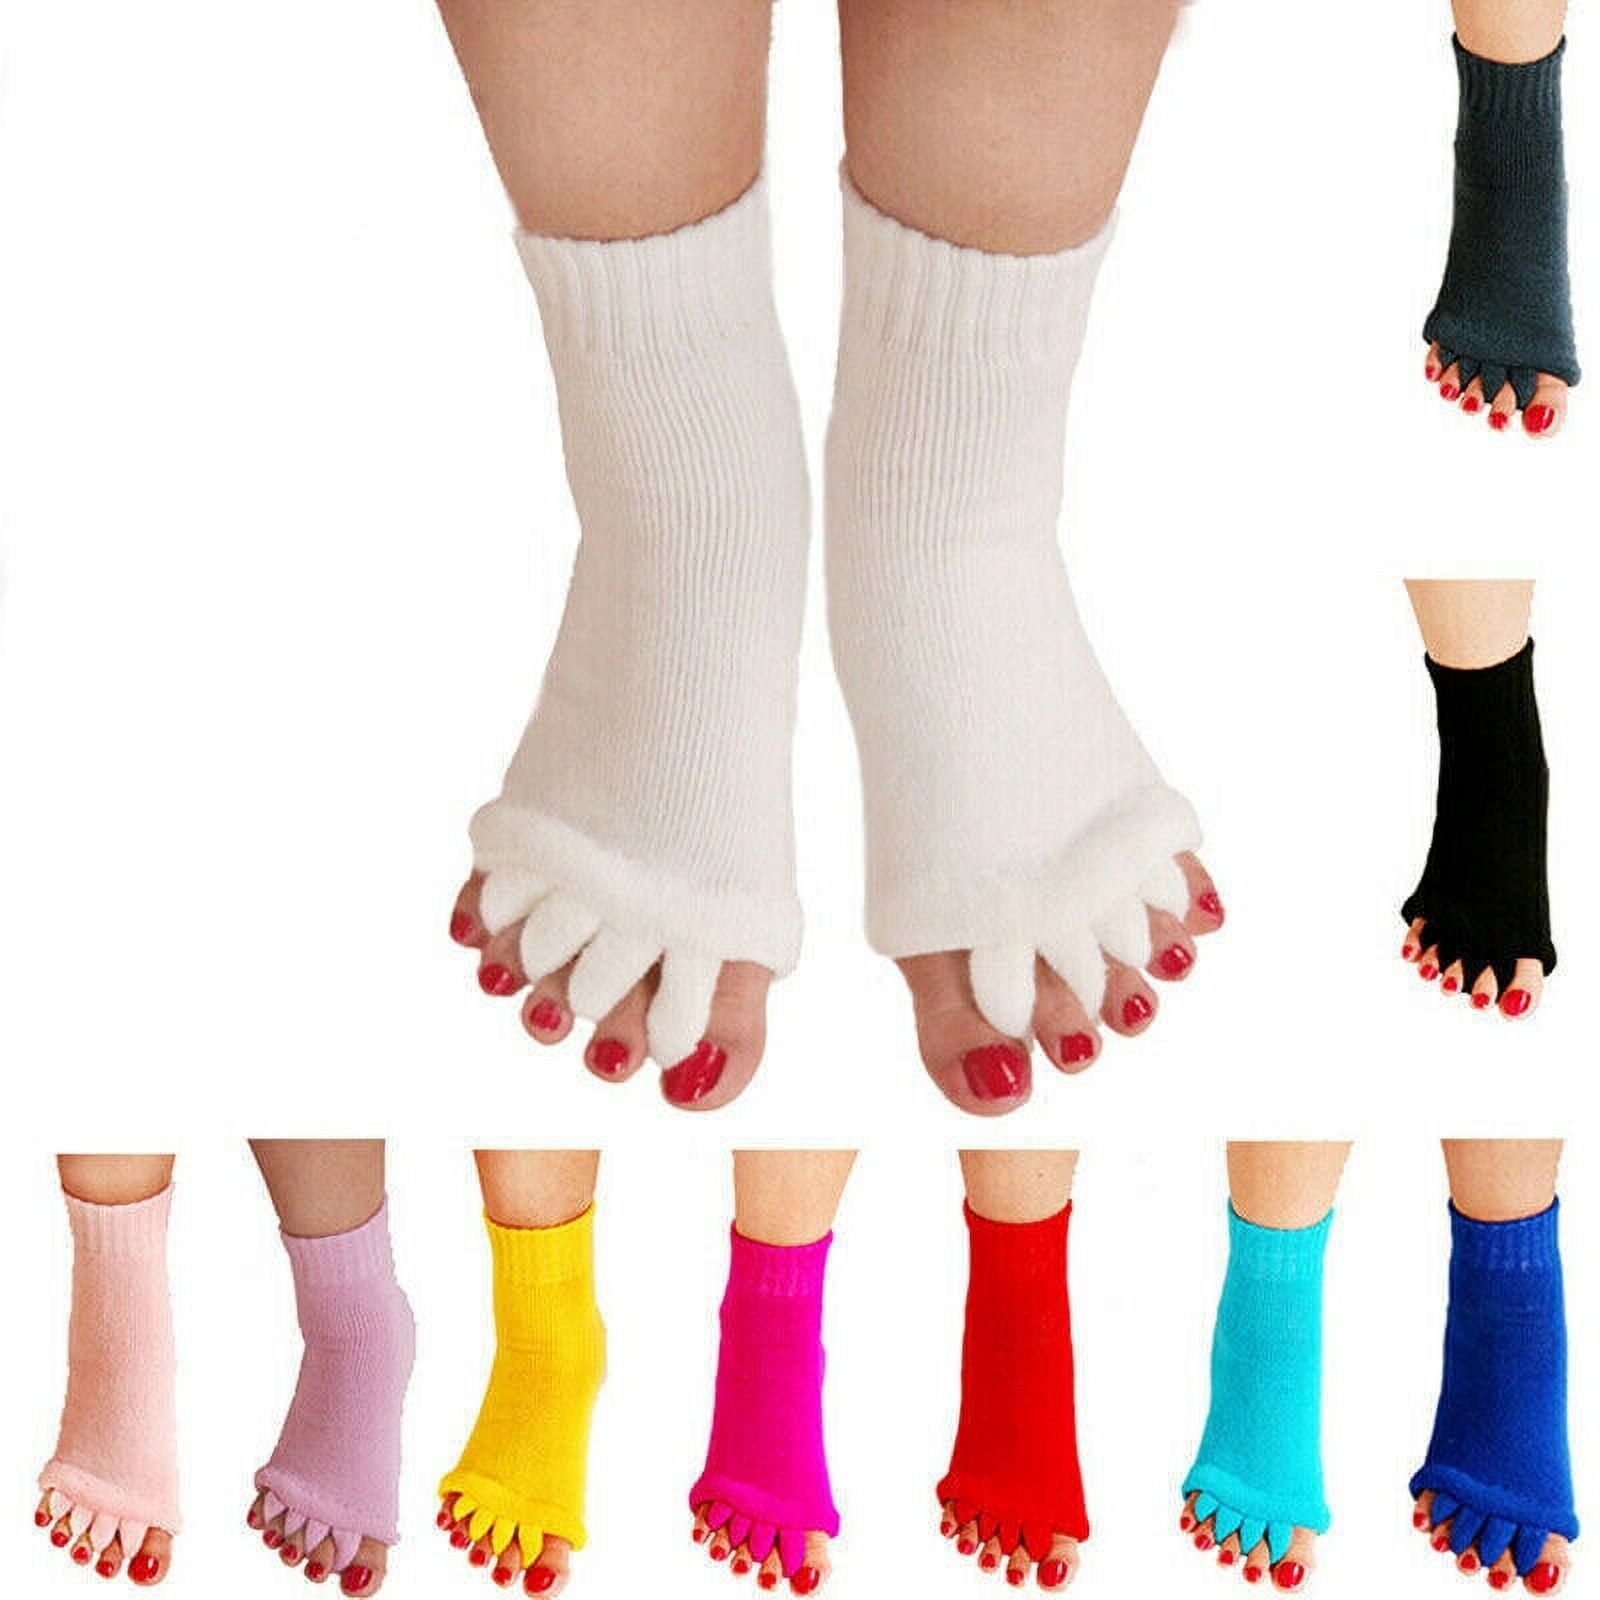 Only Happy Feet Brings You This Type Of Foot Relief Toe Separator